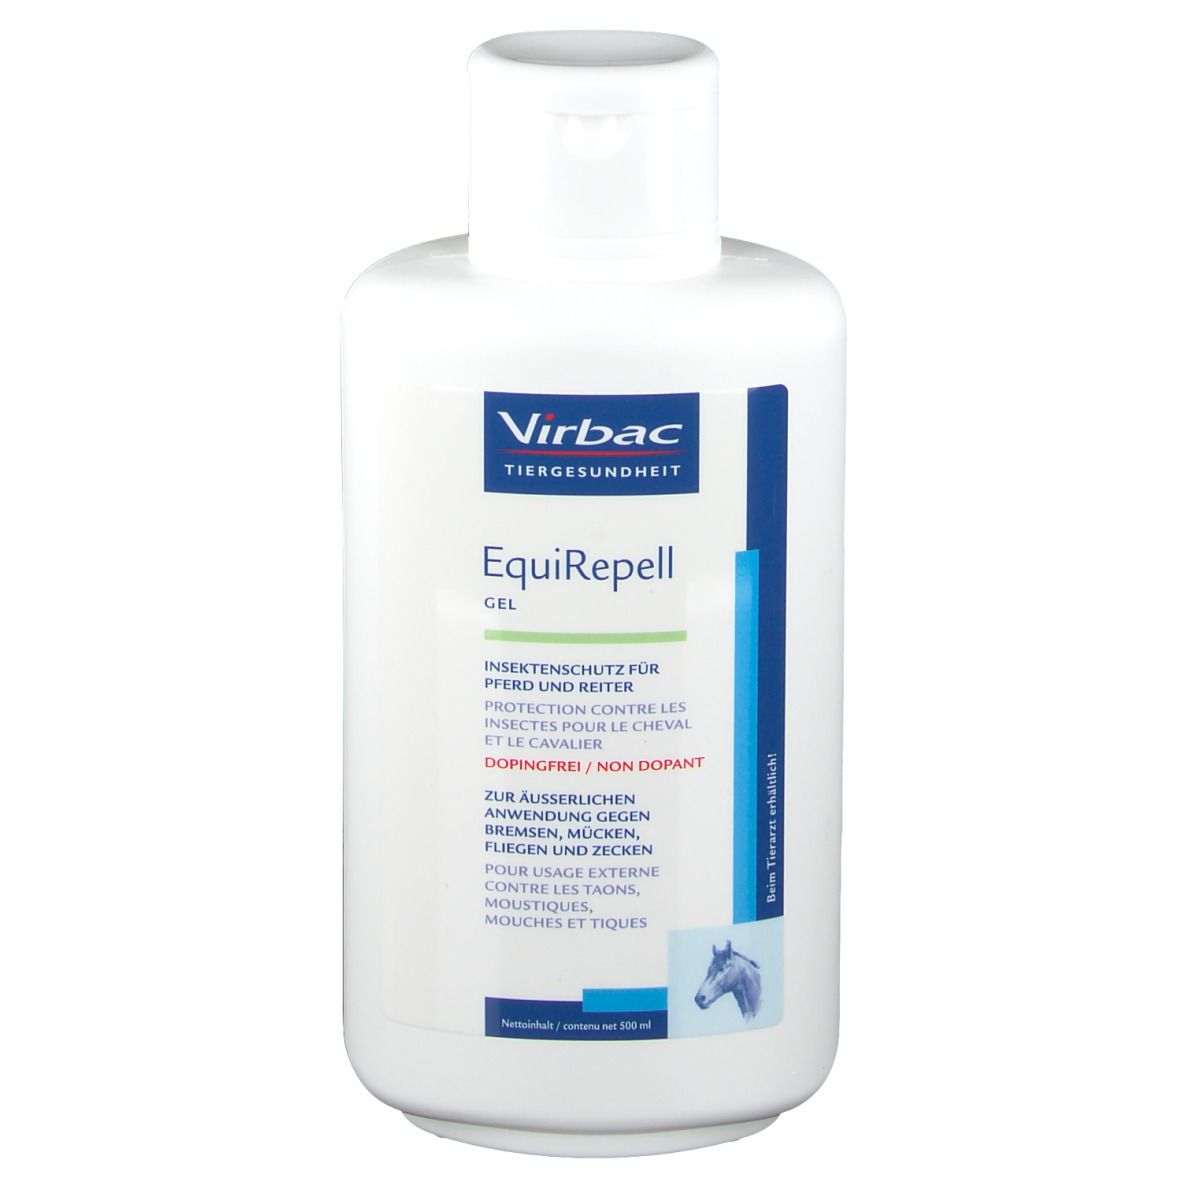 EquiRepell Gel